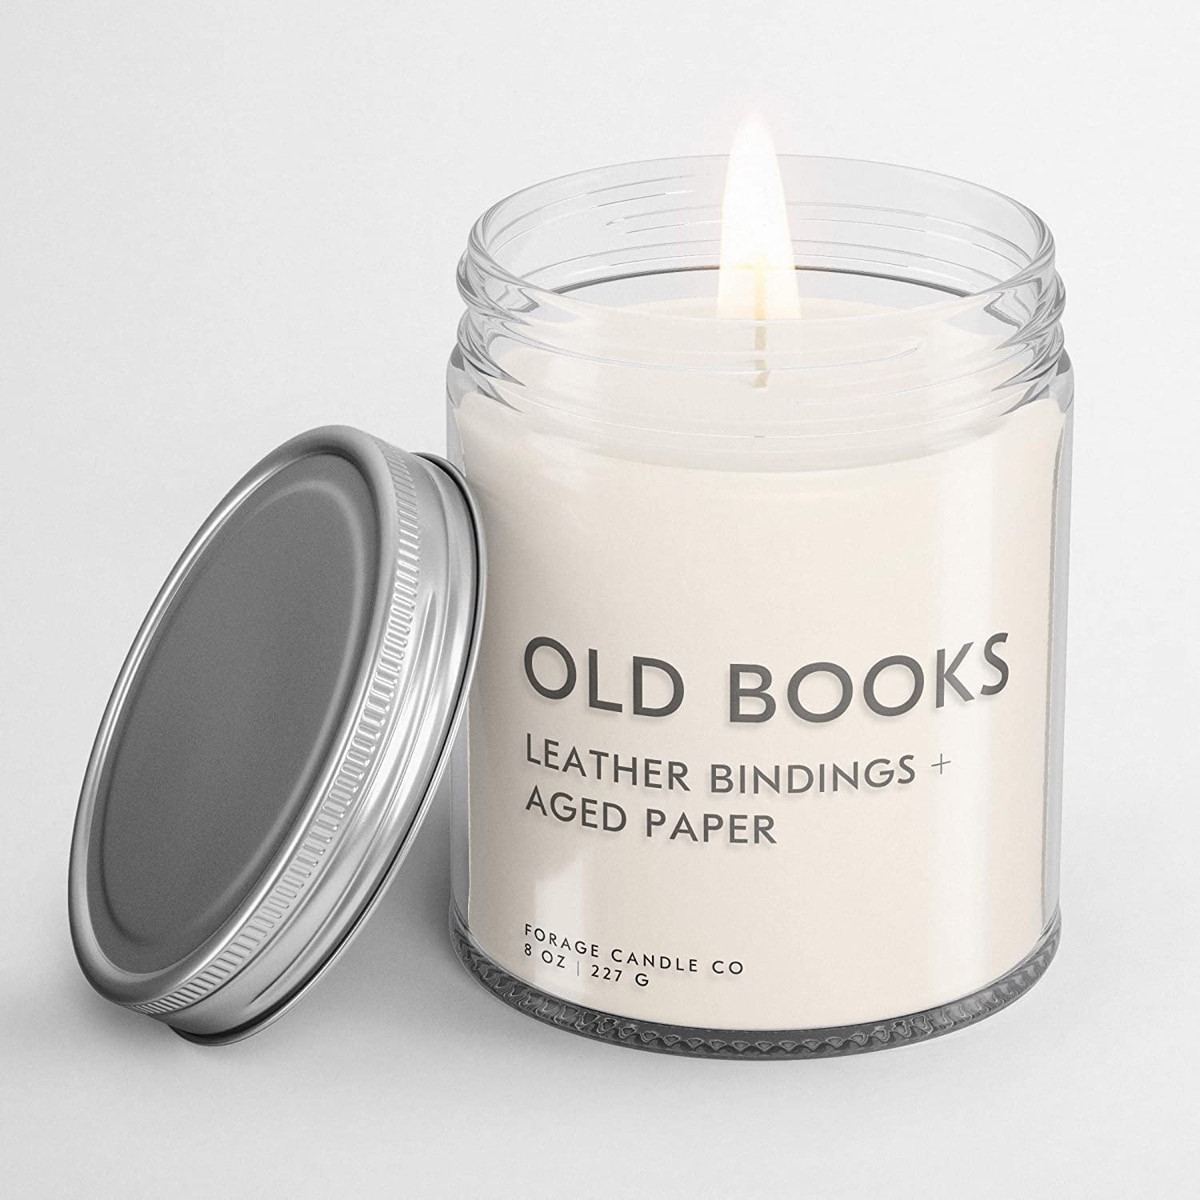 Book-scented candle - best gift ideas for Kindle lovers